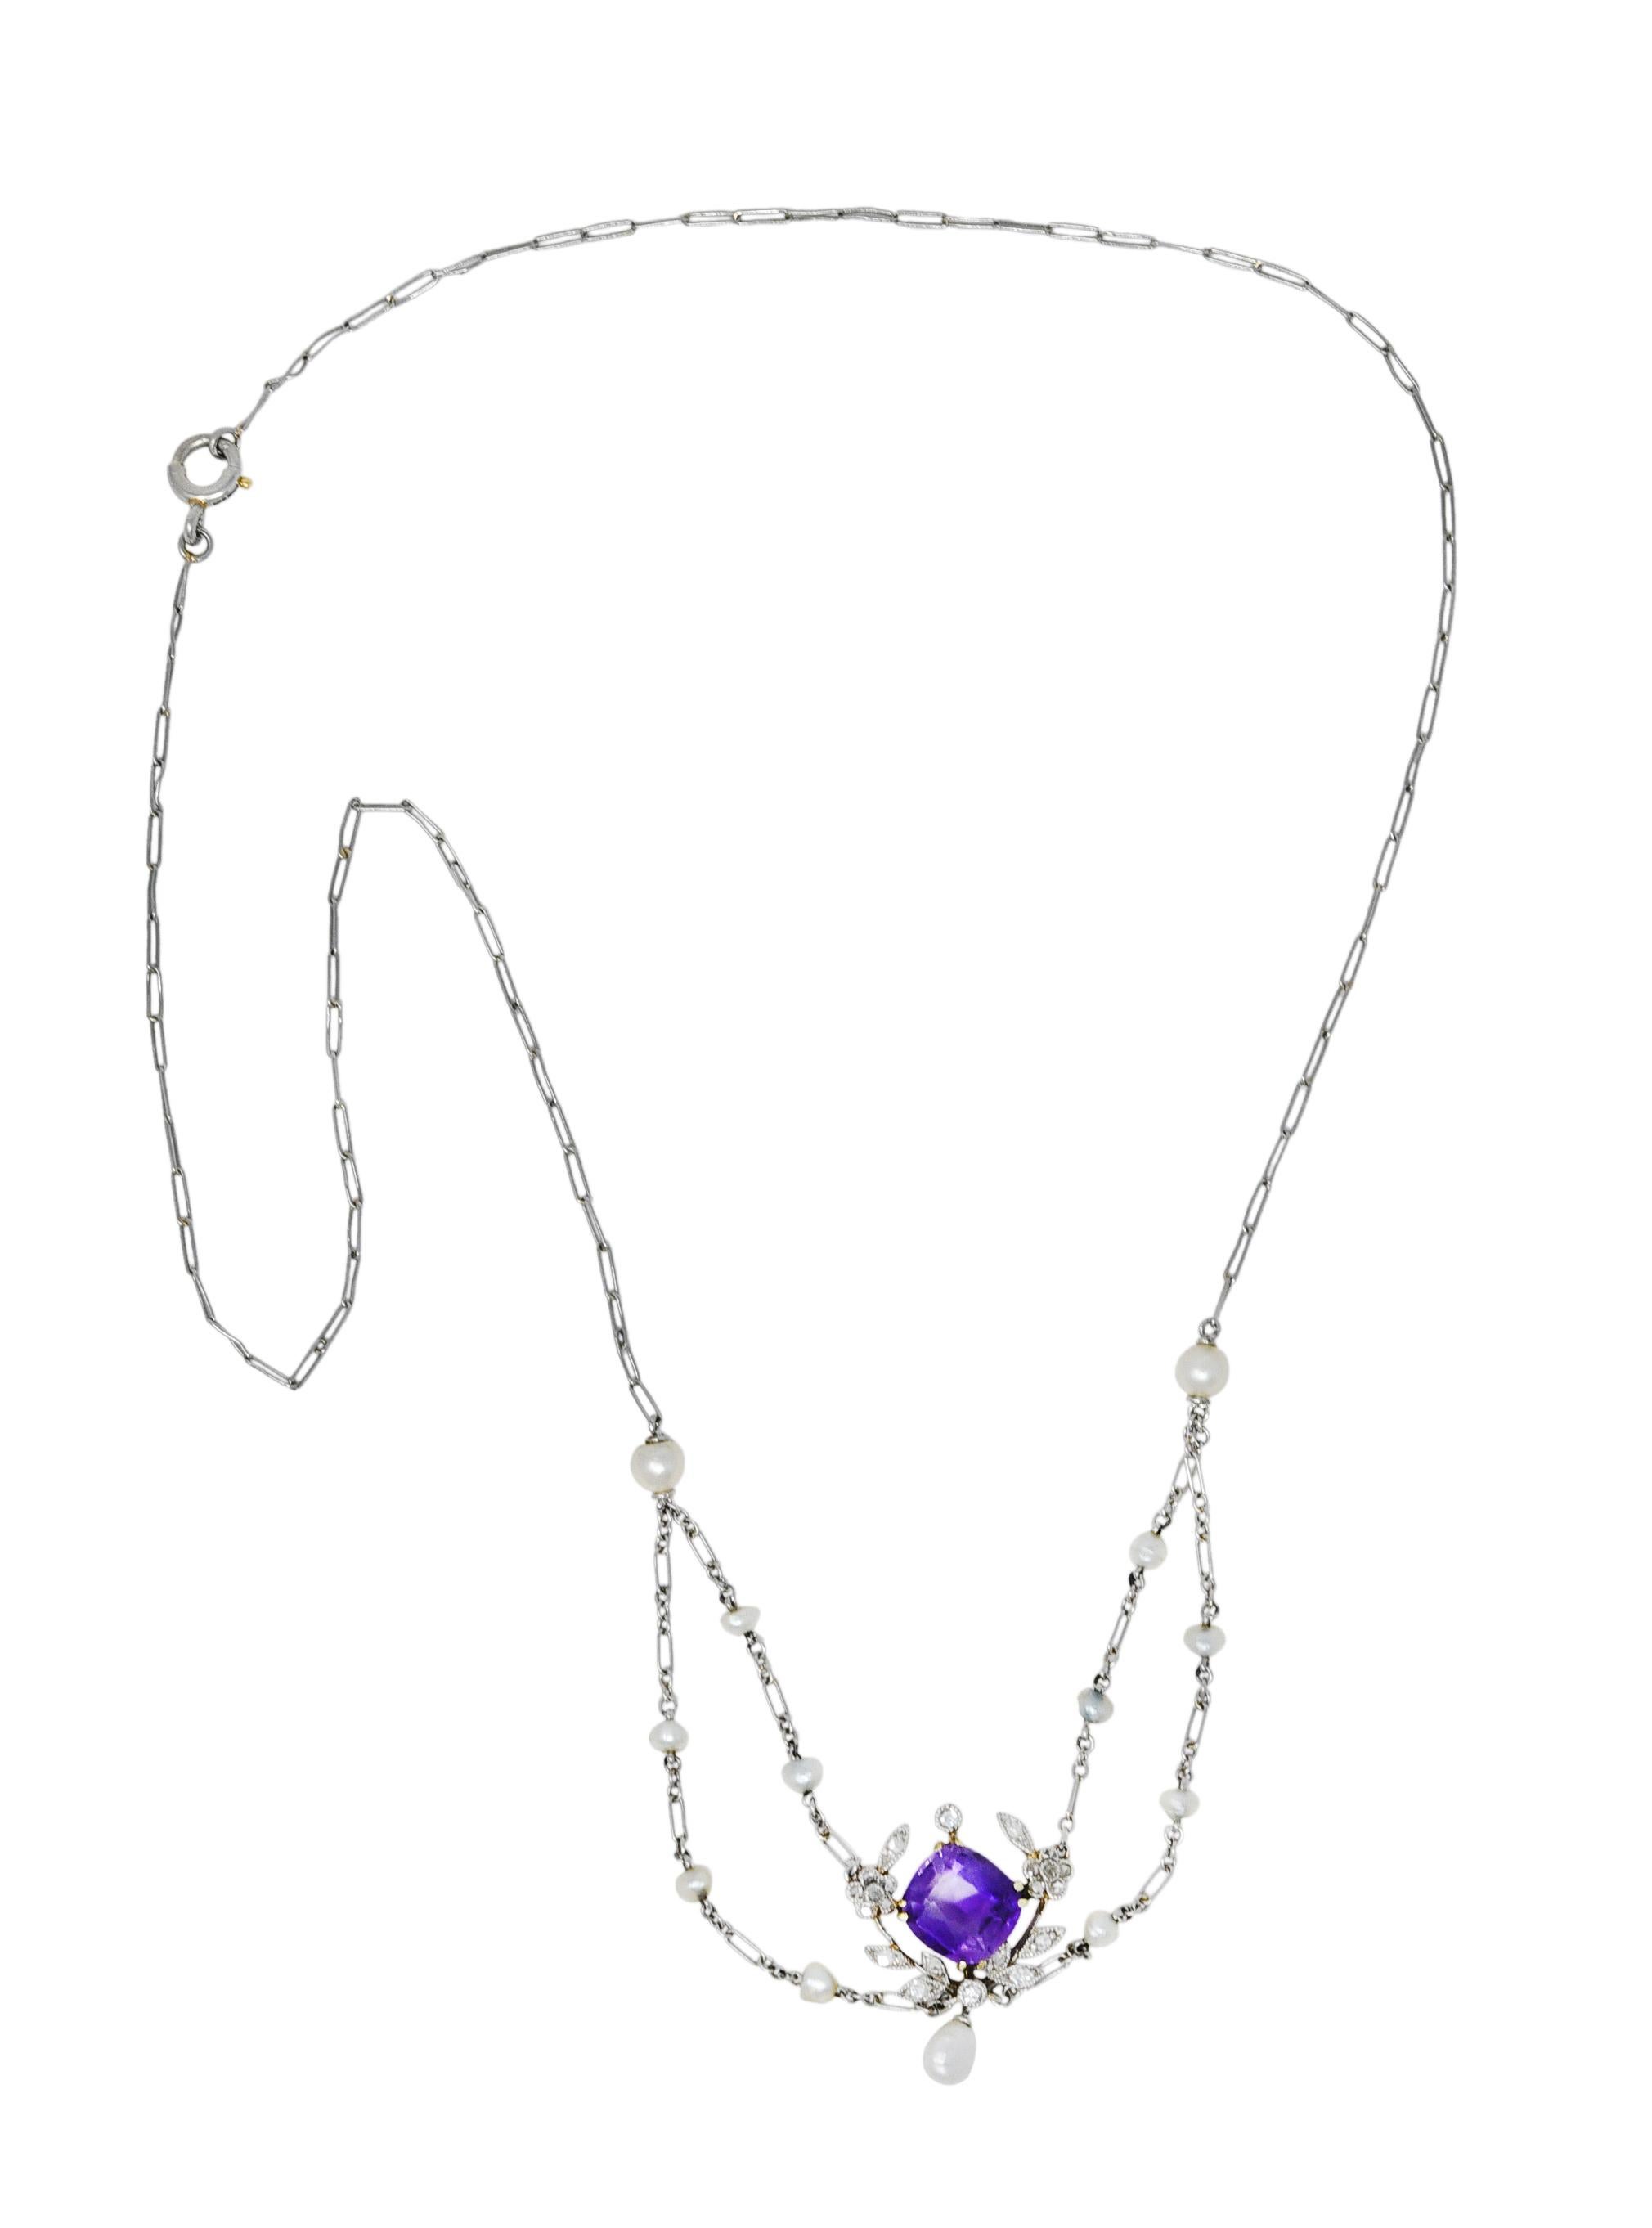 Paperclip style chain features a swagged center

With baroque pearl stations and suspending a baroque pearl drop

Measuring from 2.5 mm to 4.0 mm and very well matched

Centering a cushion cut amethyst measuring approximately 7.5 x 7.1 mm

Medium